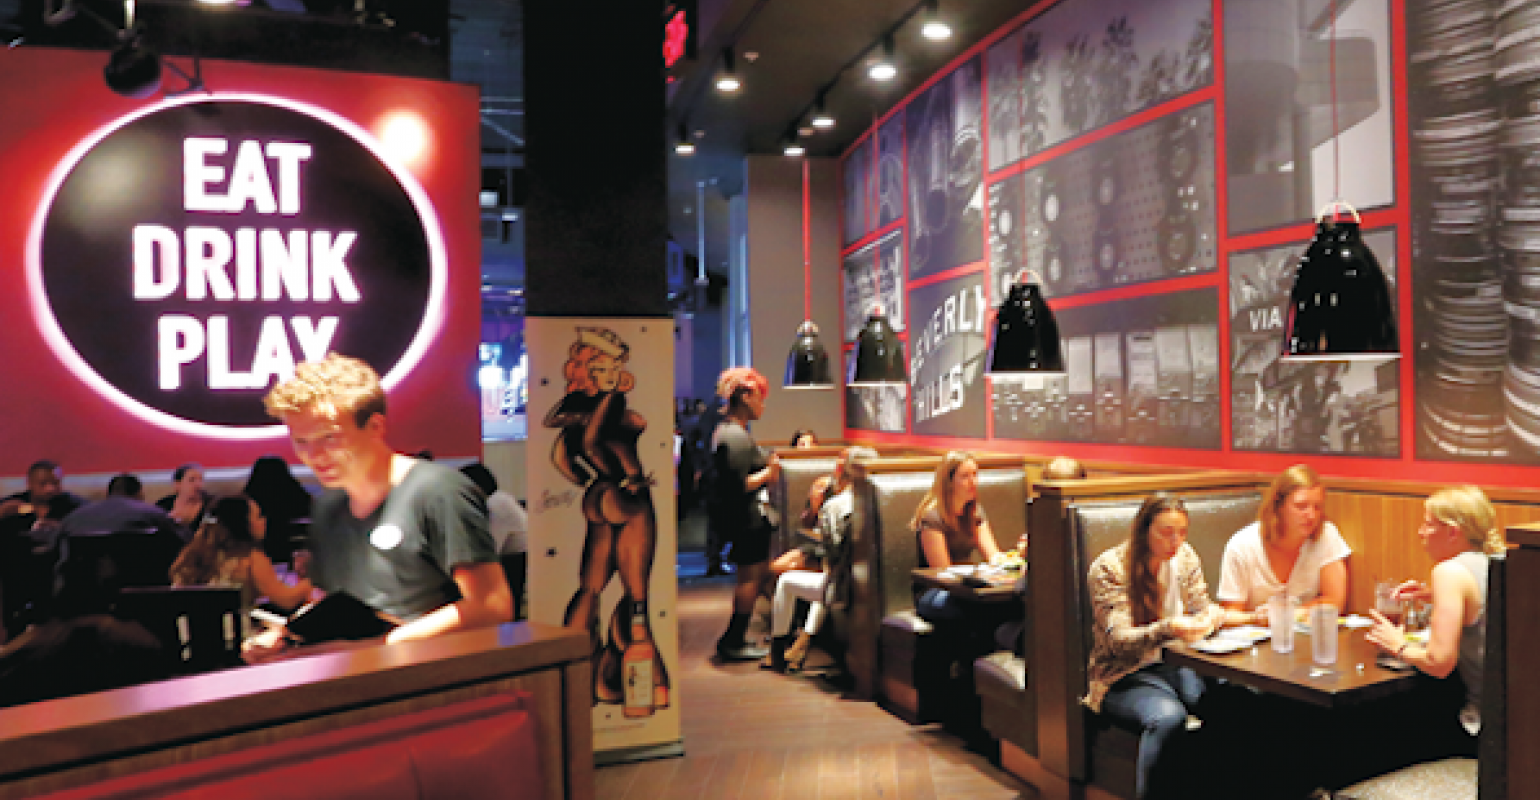 2016 Top 100: Casual Dining succeeds with focus on food and fun